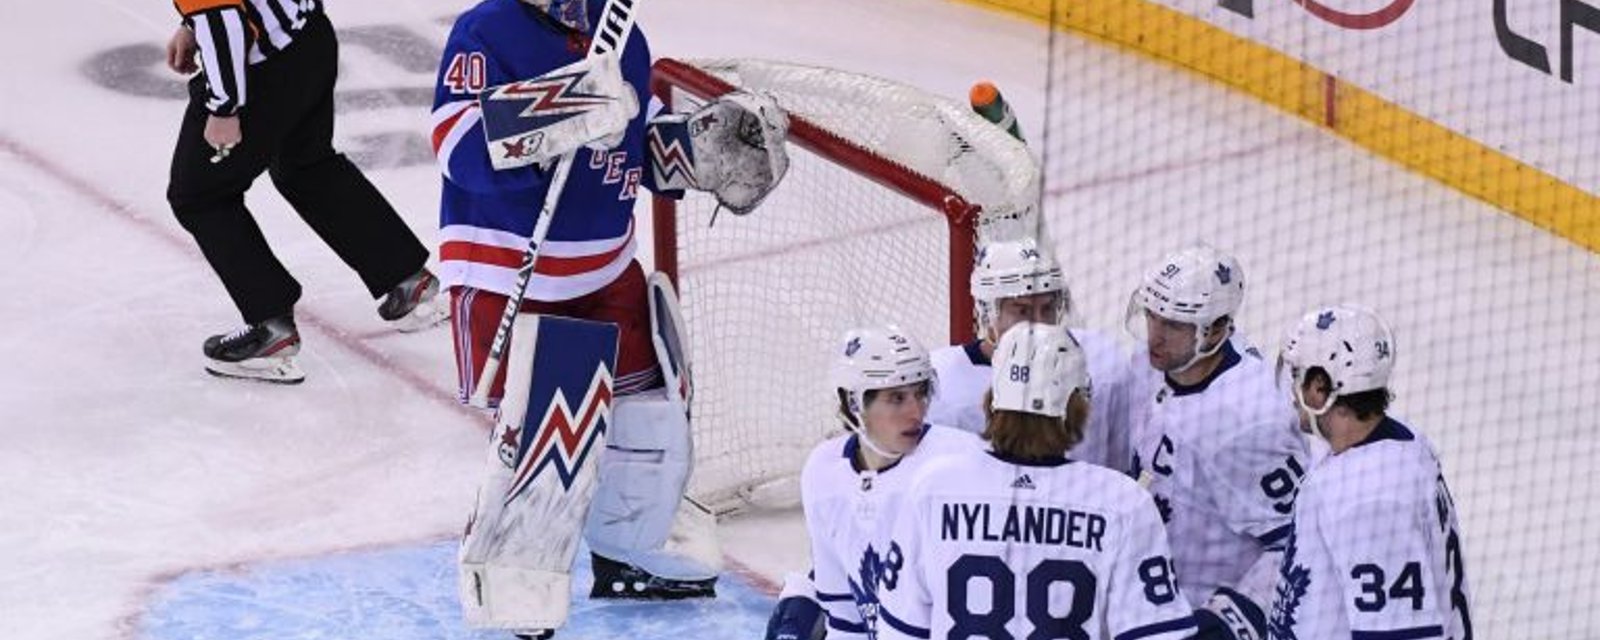 Pending blockbuster trade between Leafs and Rangers? 